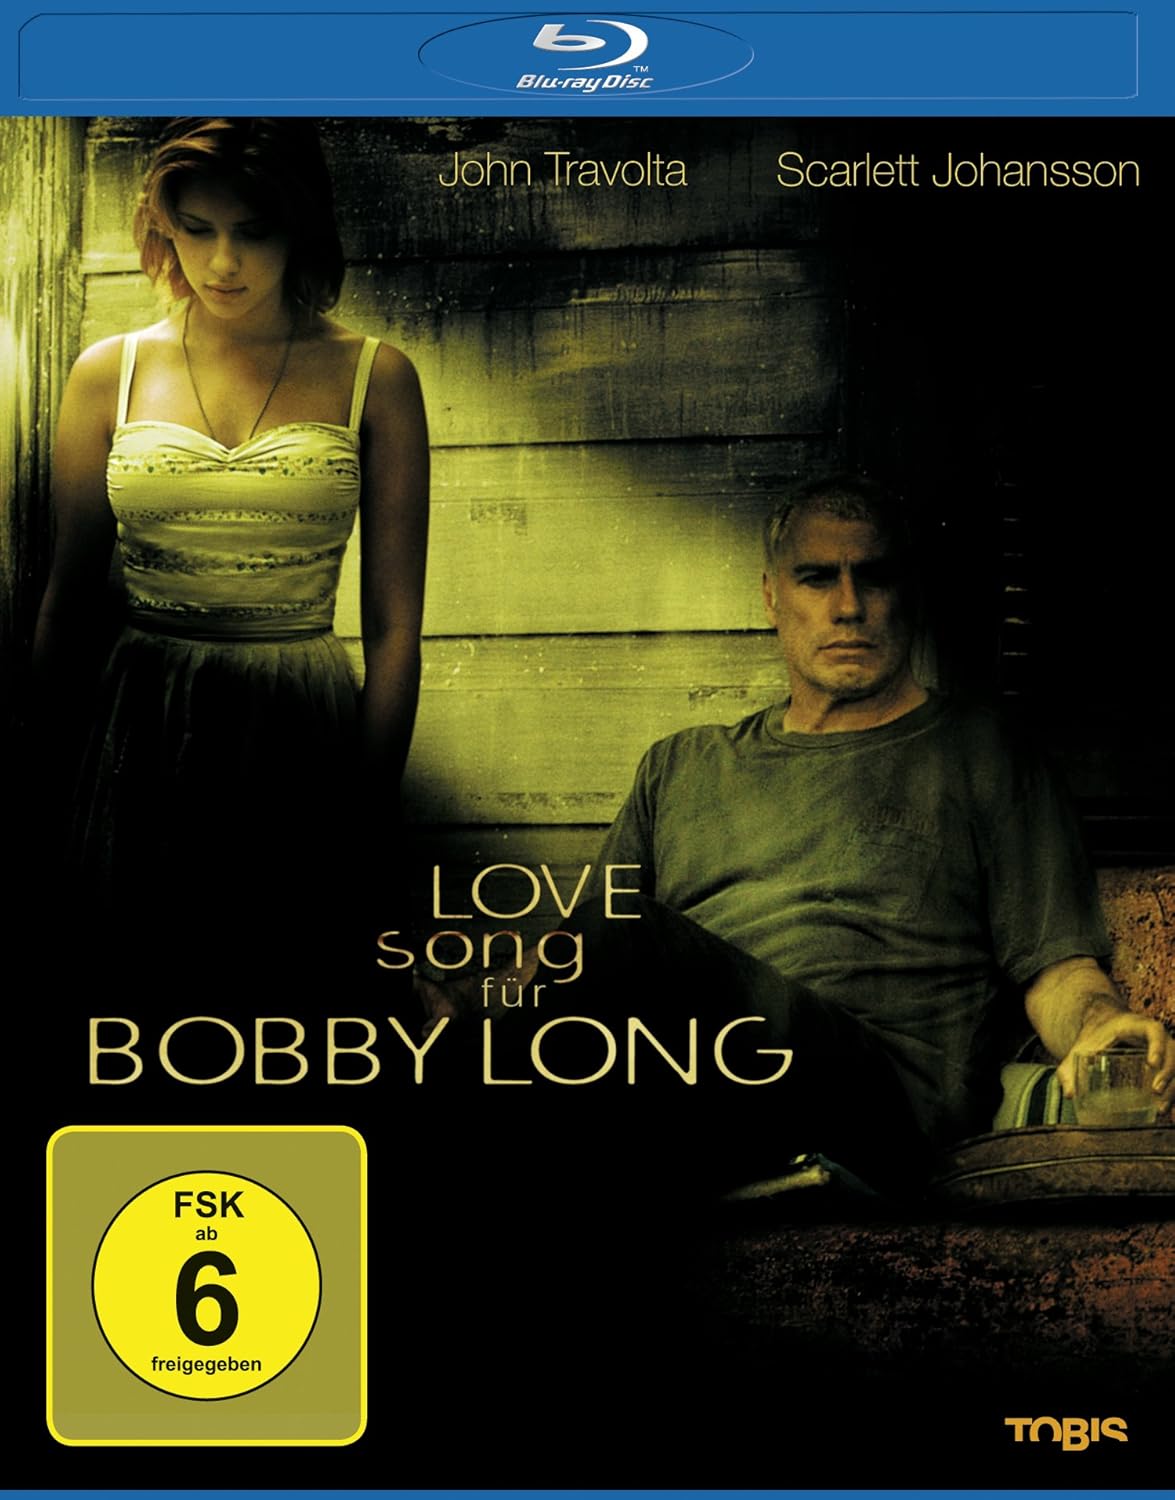 A Love Song for Bobby Long (2004) 448Kbps 23.976Fps 48Khz 5.1Ch DVD Turkish Audio TAC